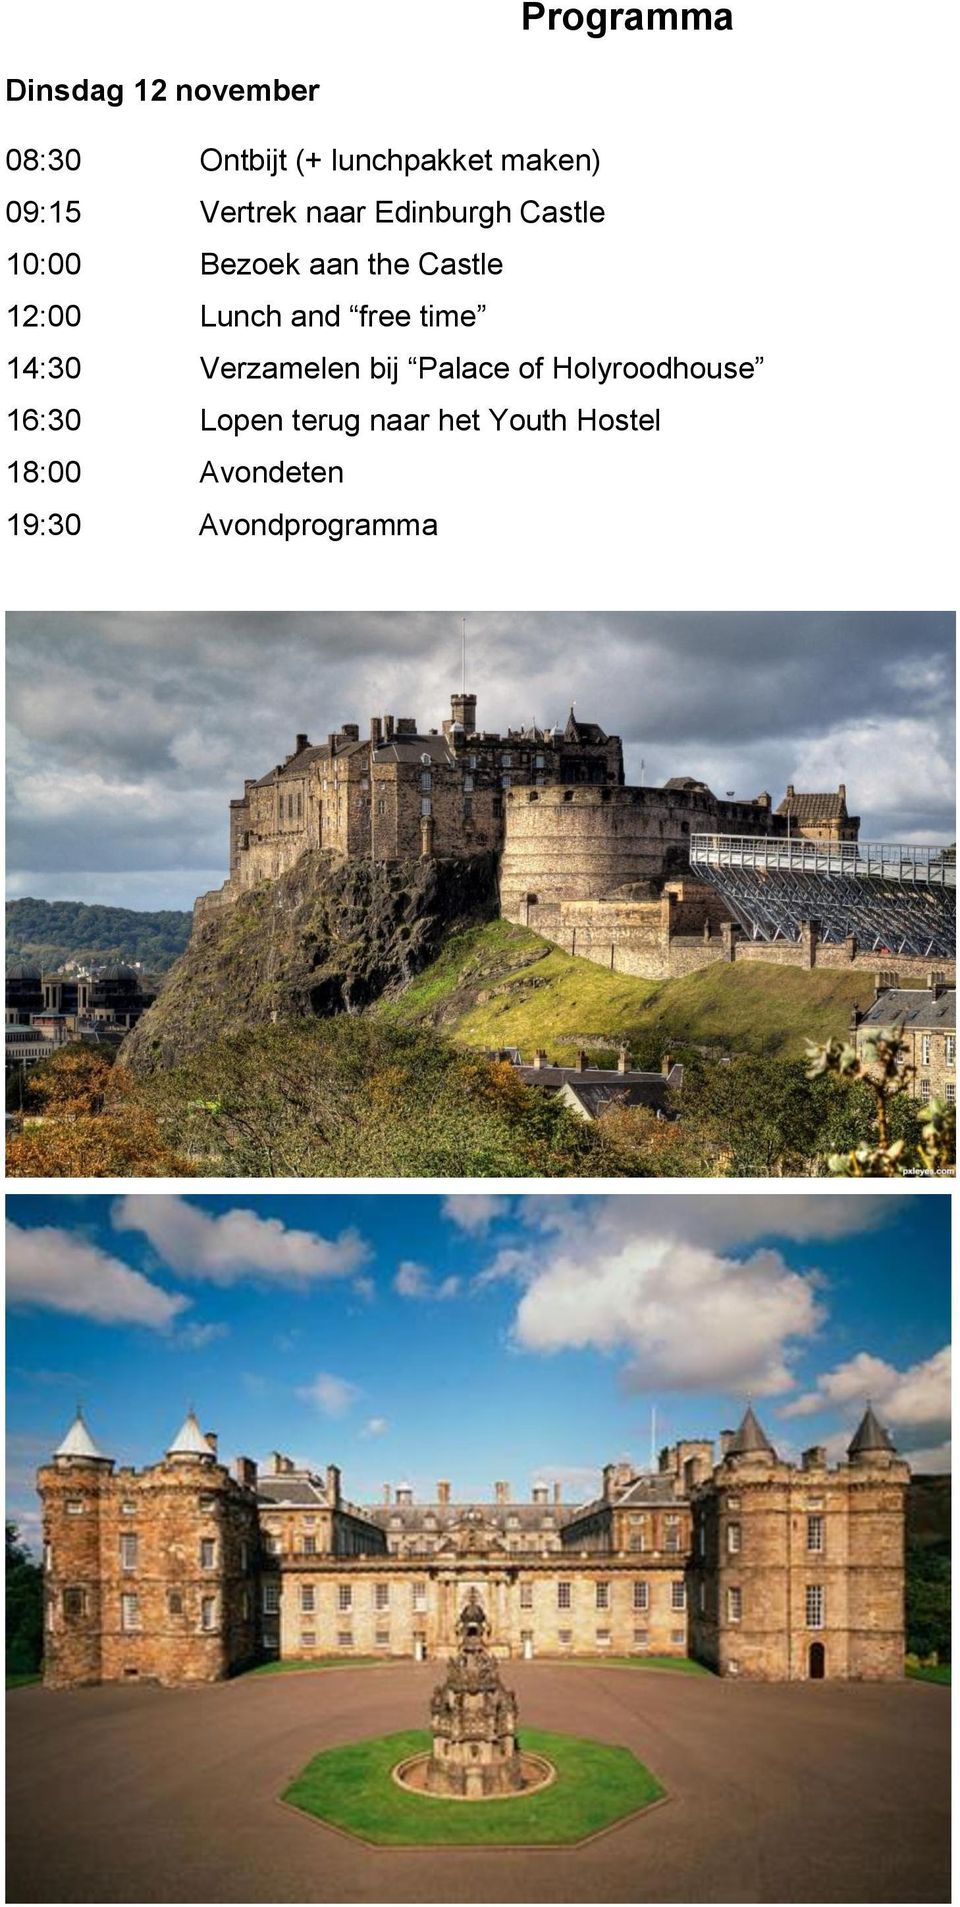 Lunch and free time 14:30 Verzamelen bij Palace of Holyroodhouse